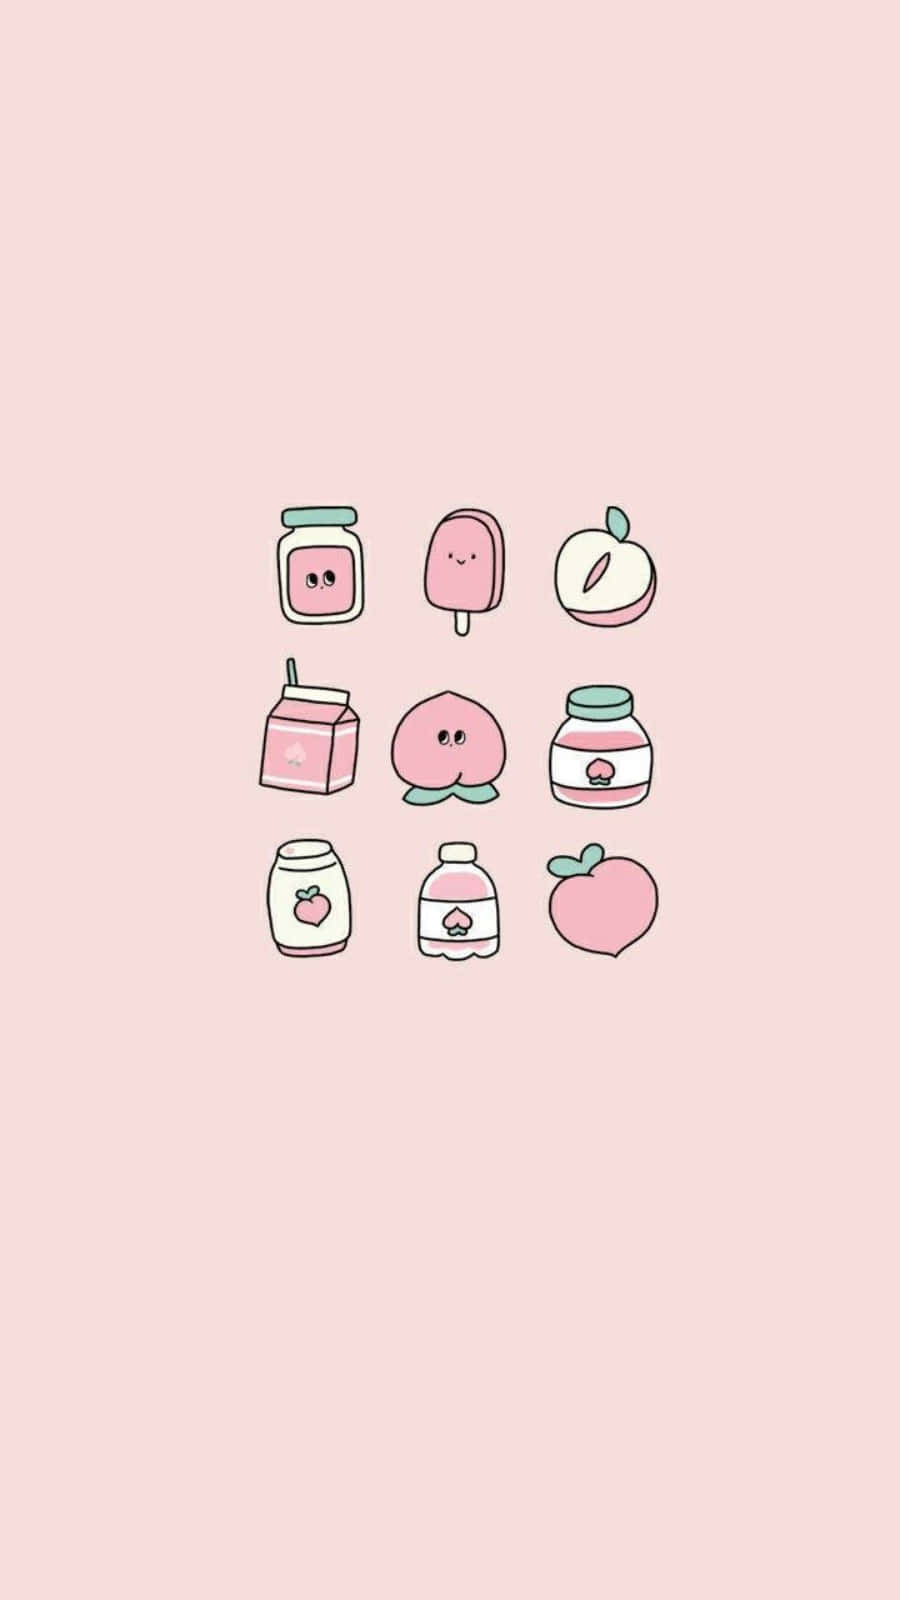 Aesthetic Pink Kawaii Fruits And Desserts Wallpaper